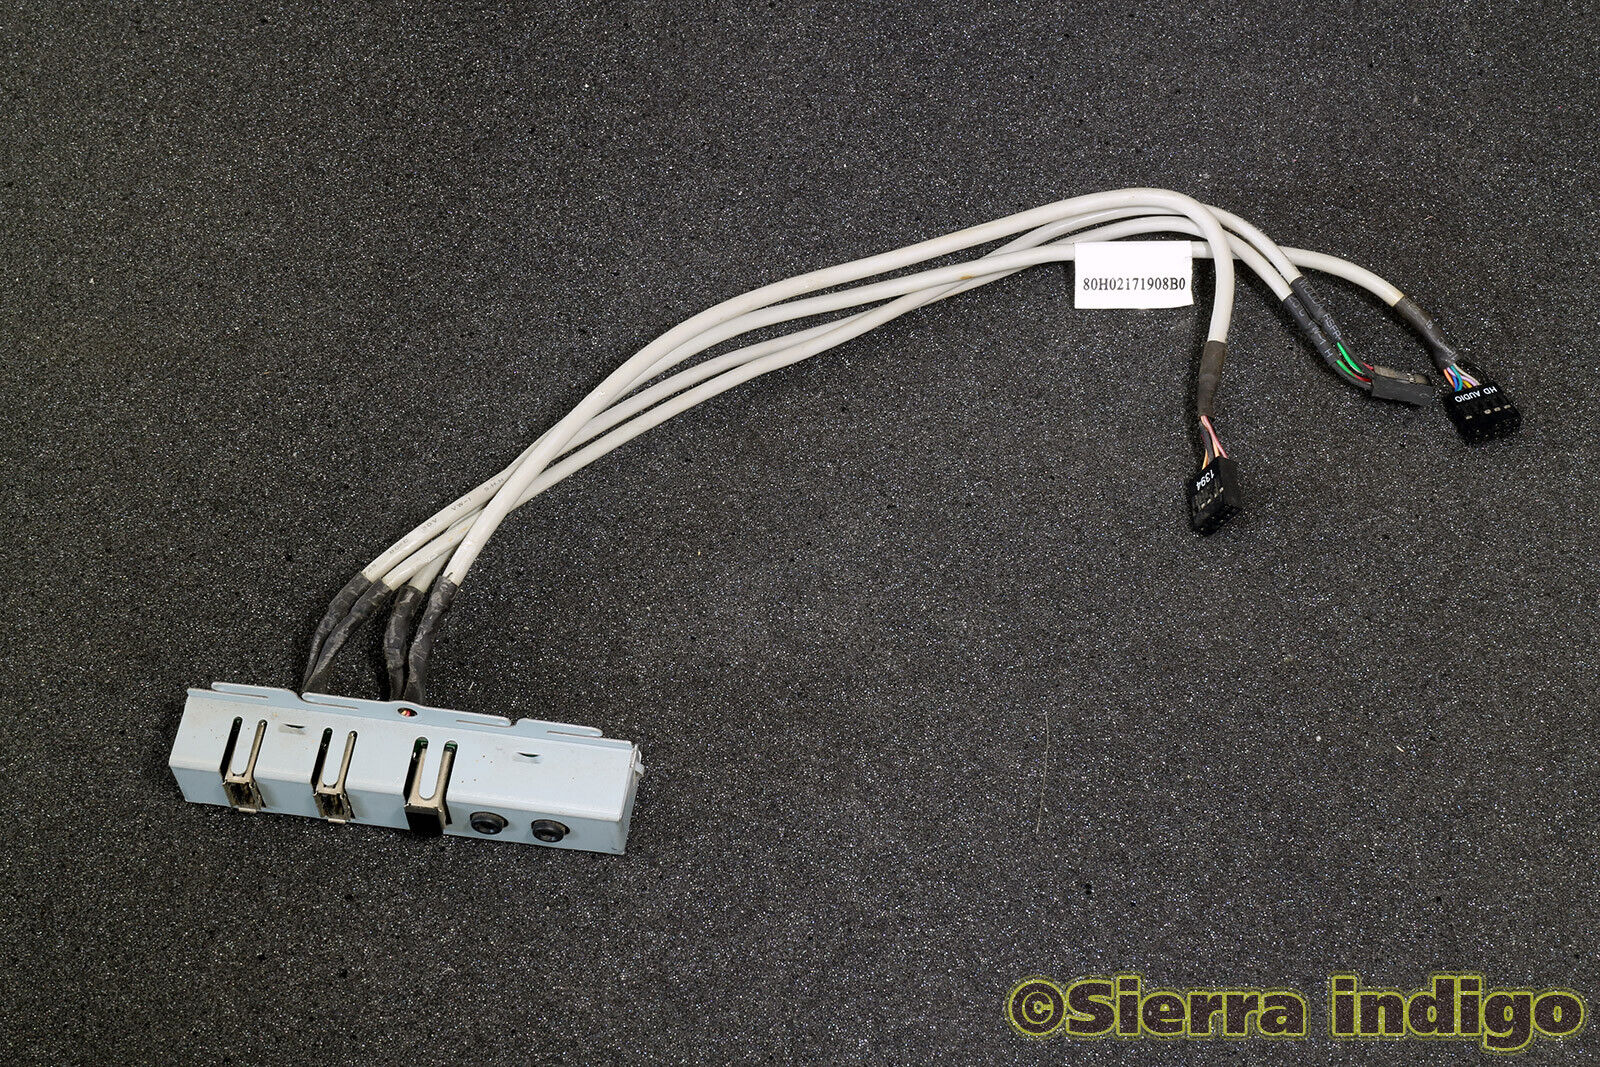 Chenbro 80H02171908B0 Front Audio USB i/o Panel Cable